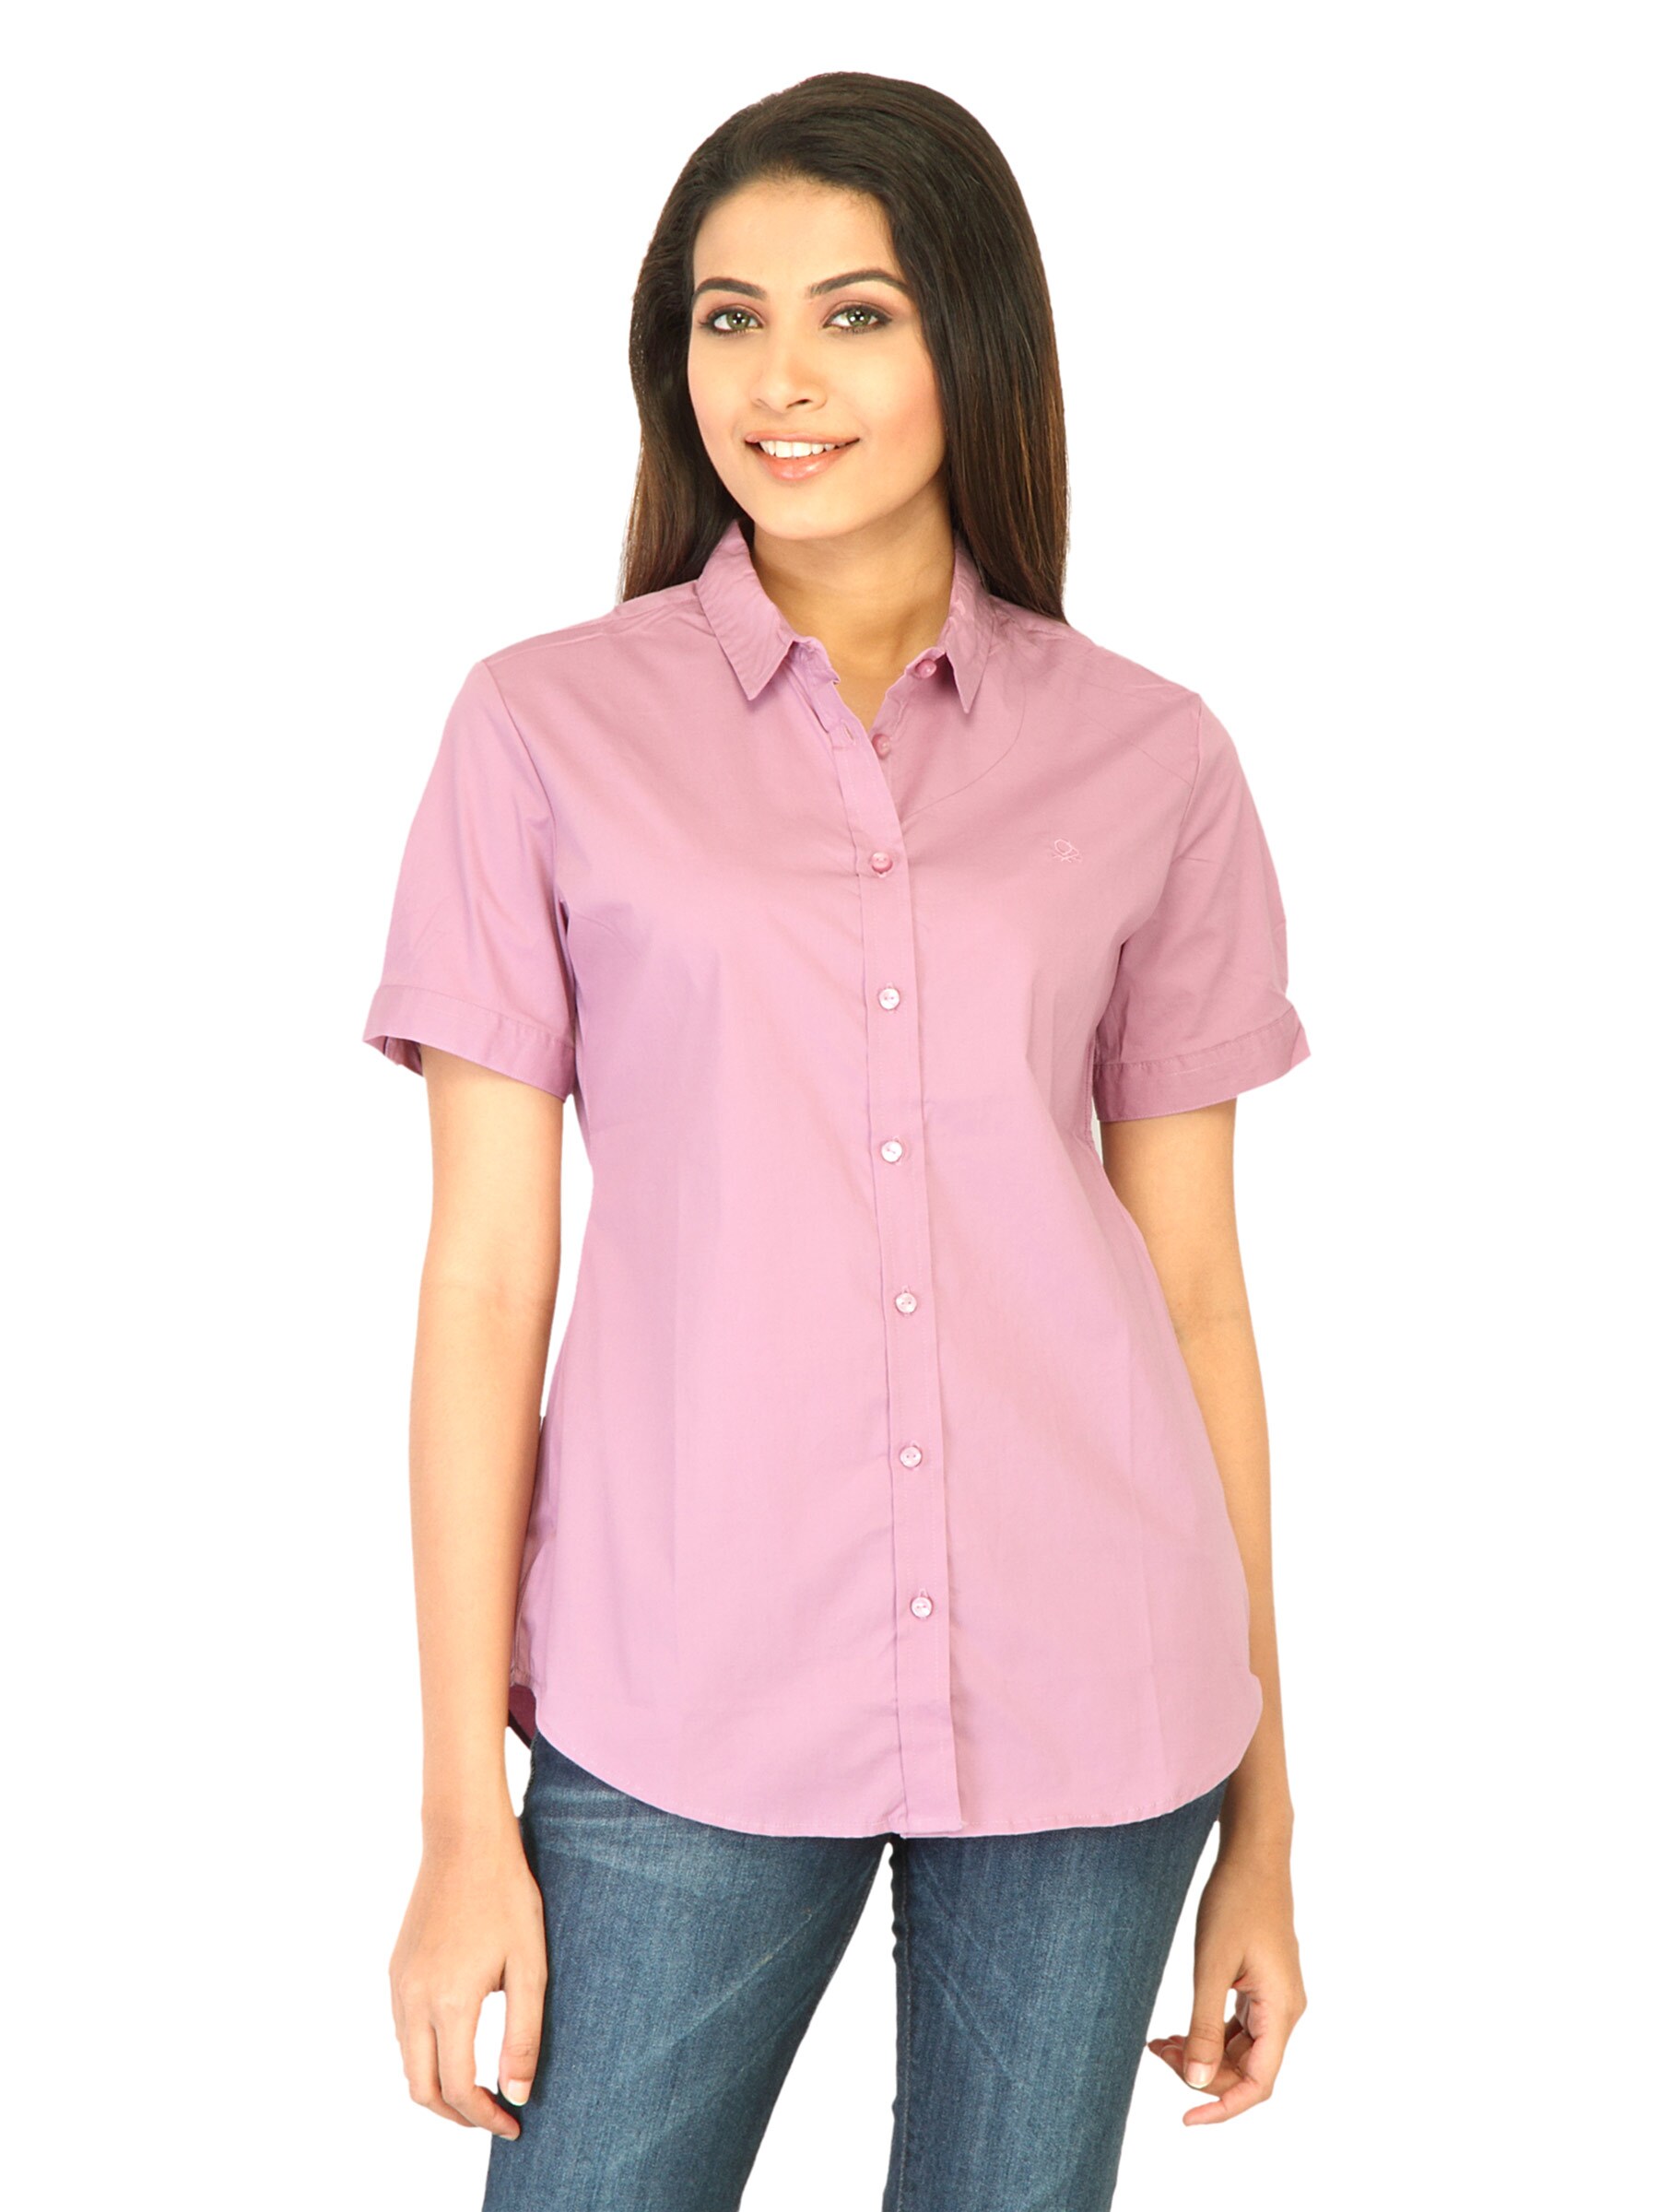 United Colors of Benetton Women Solid Pink Shirts